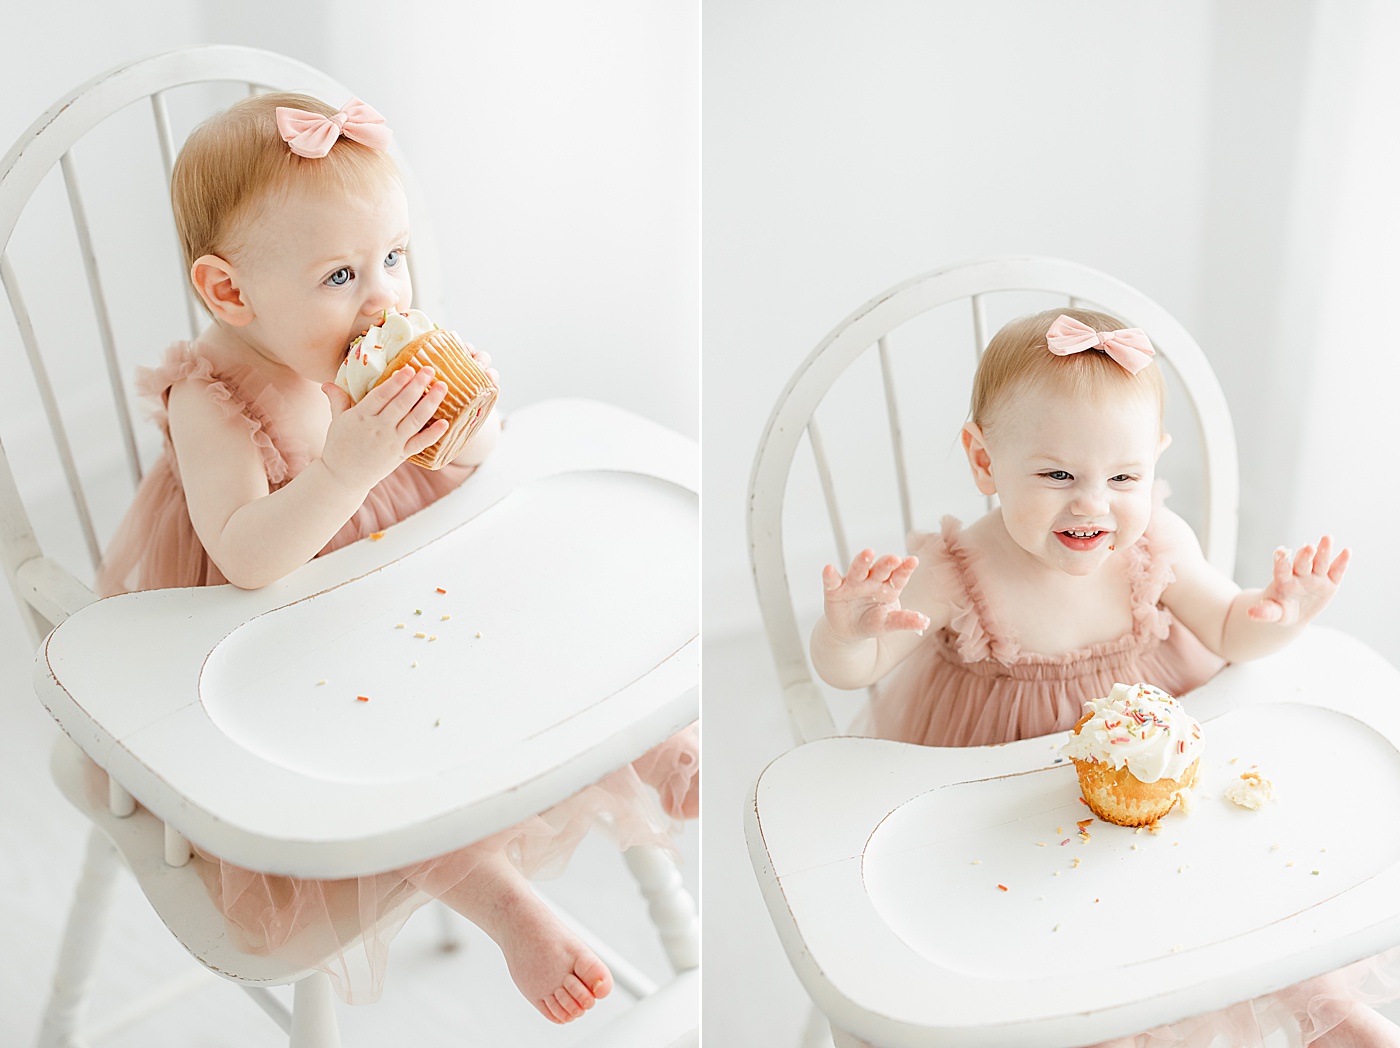 One year old with cupcake at first birthday photoshoot with Kristin Wood Photography.